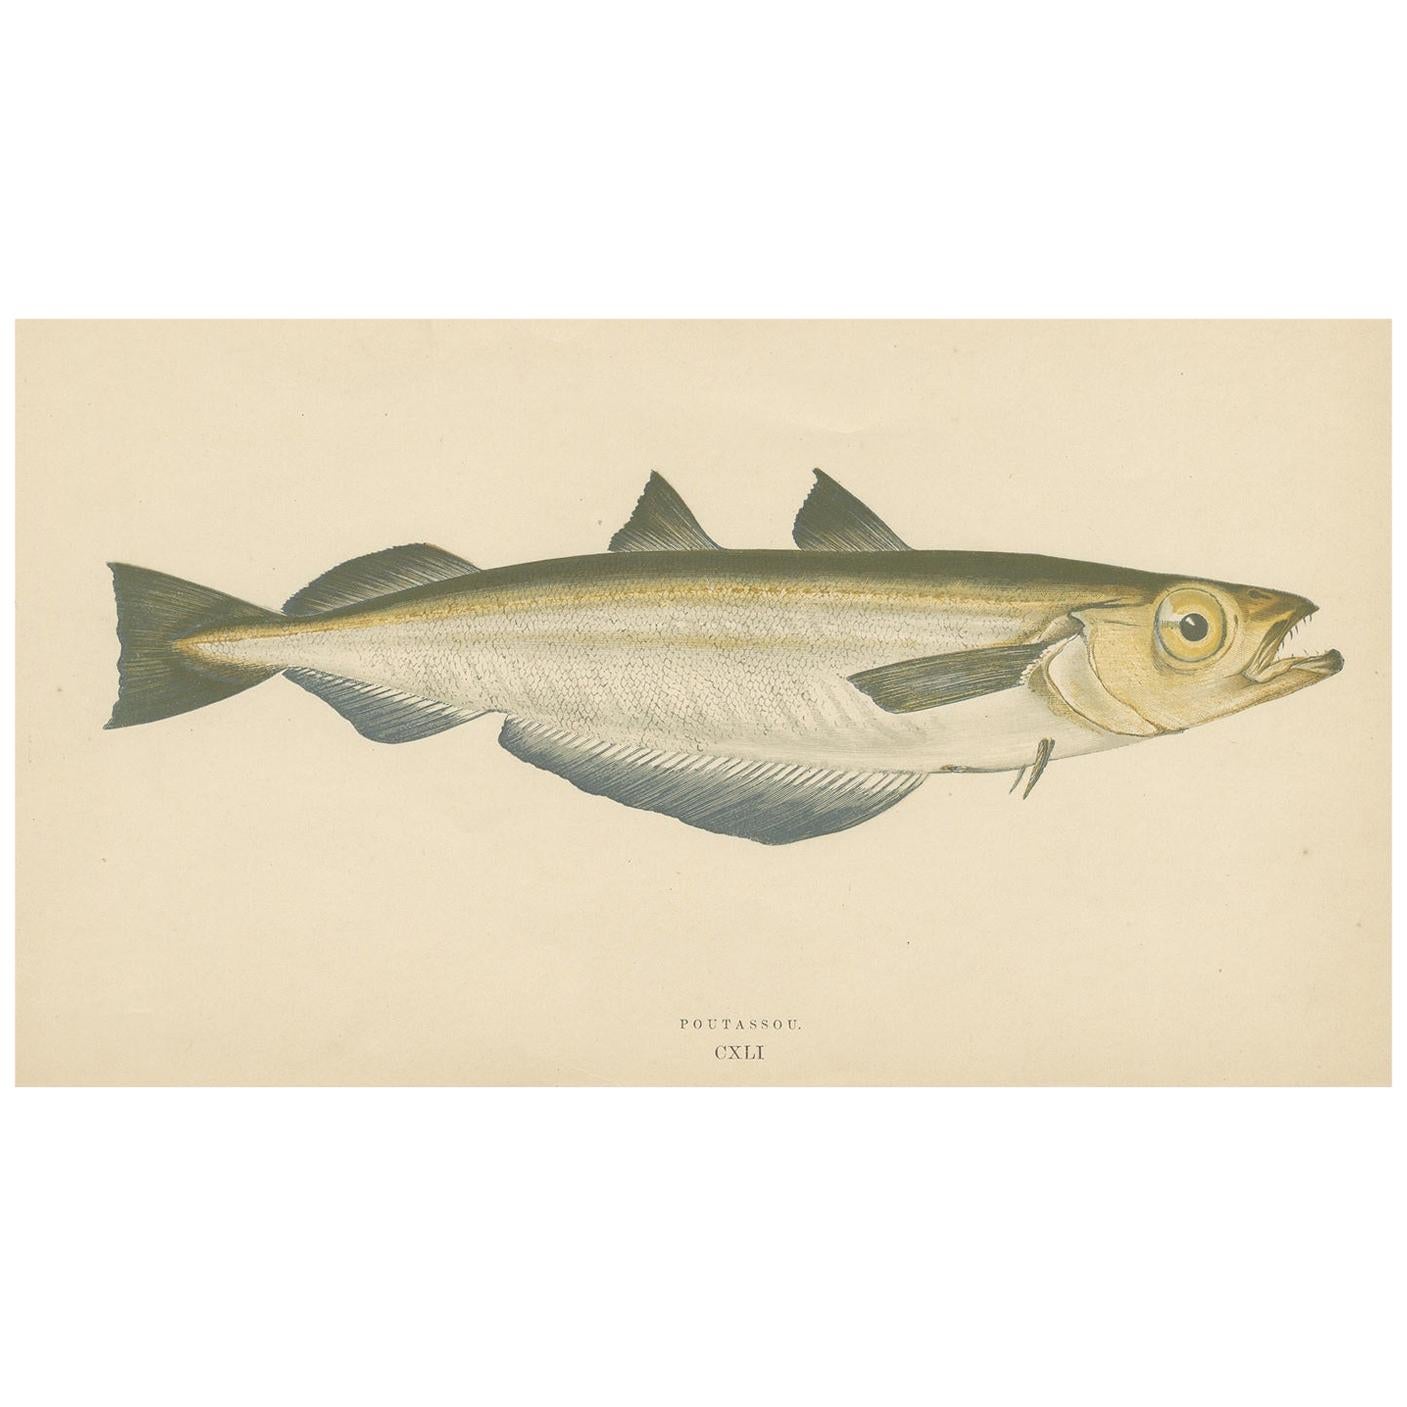 Antique Print of the Blue Whiting Fish by J. Couch, circa 1870